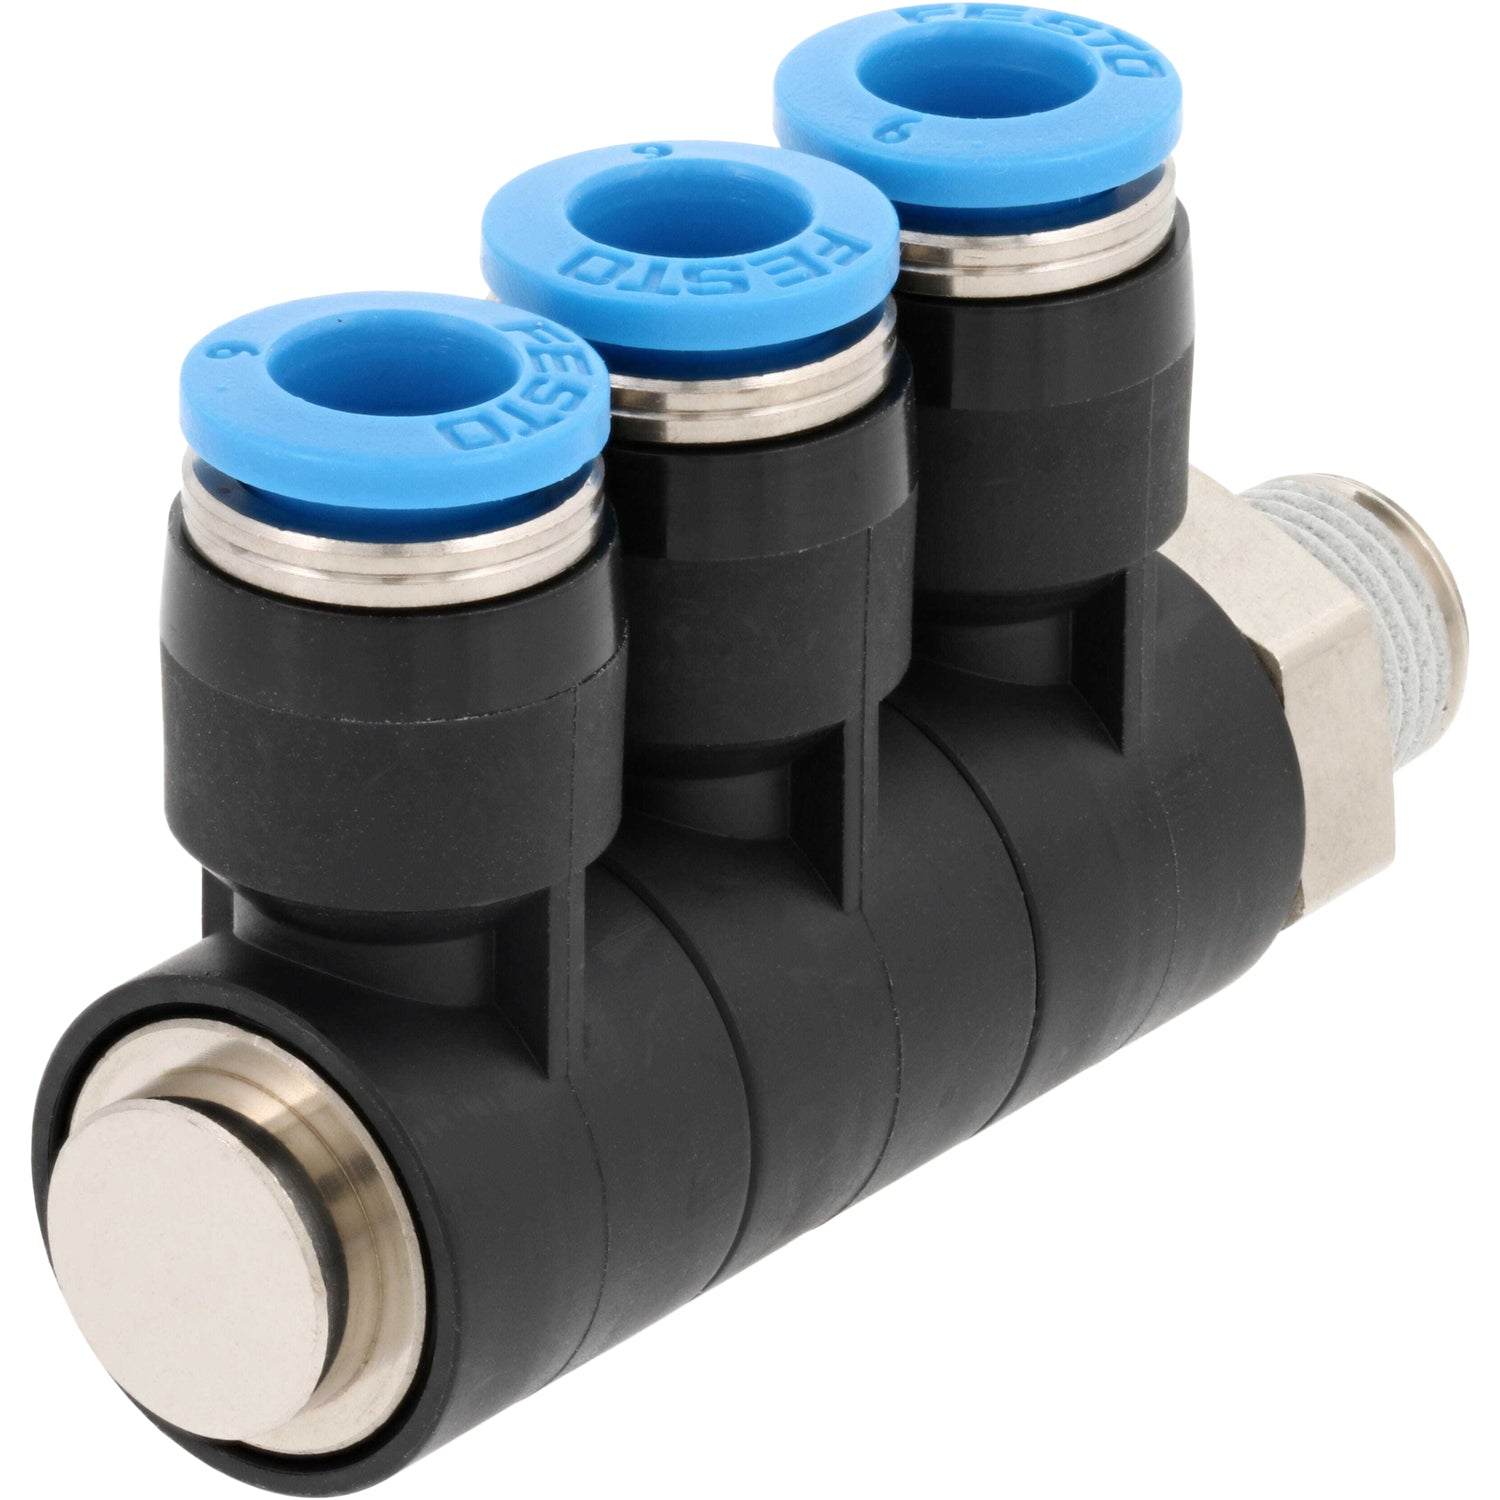 Black plastic multi distributor with nickel plated threads and blue plastic push collars. Part shown on white background. 